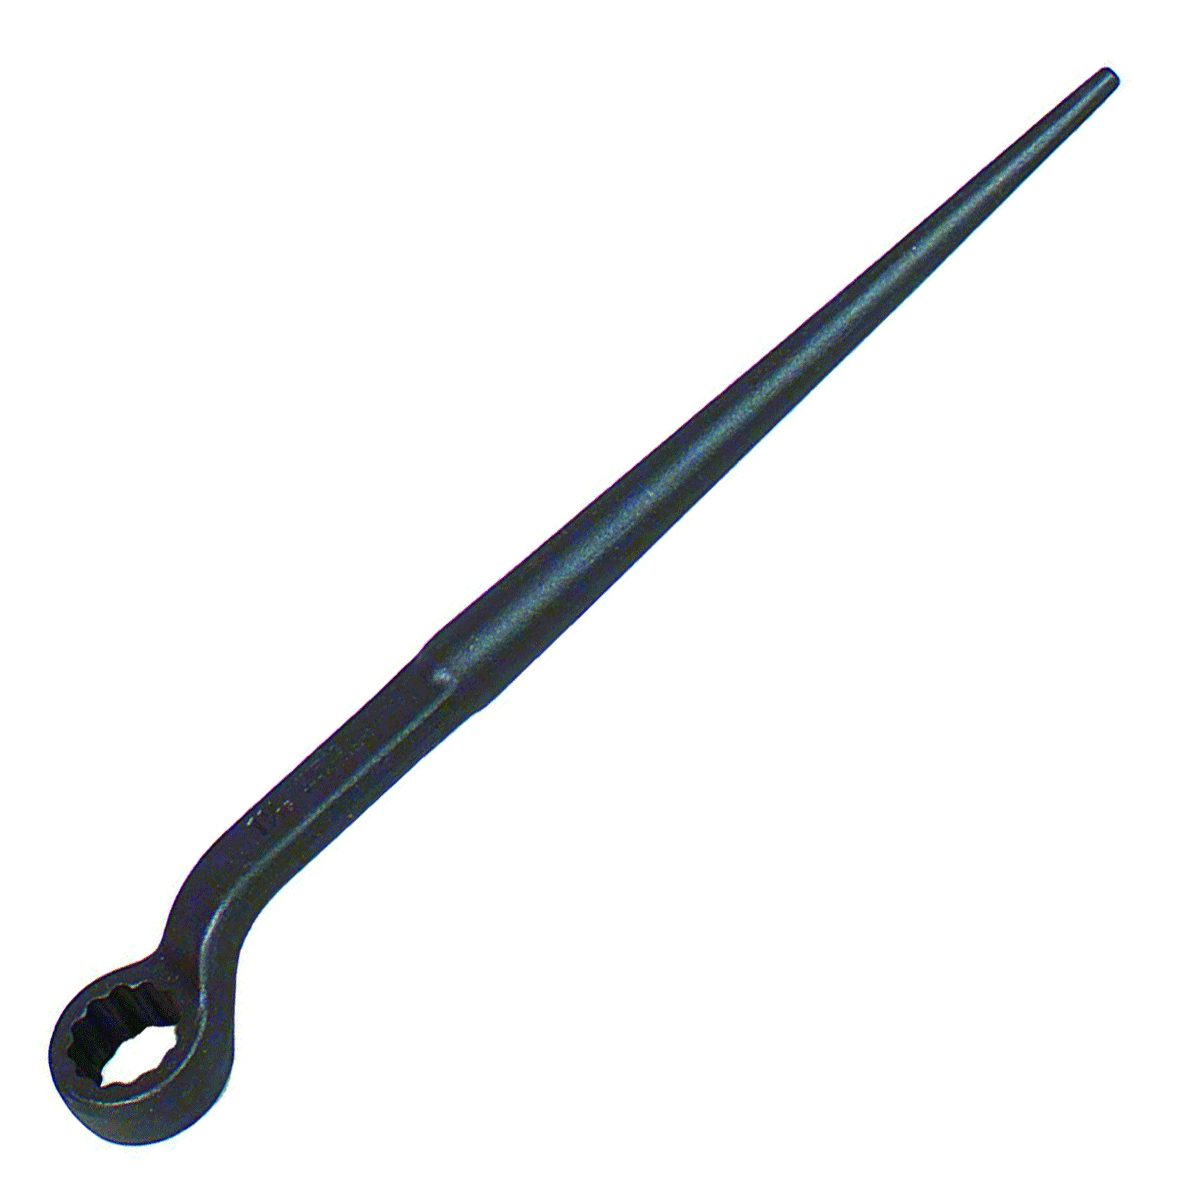 Wright 15/16" Spud Handle Box Wrench 12 Pt. #1760 (1760WR)